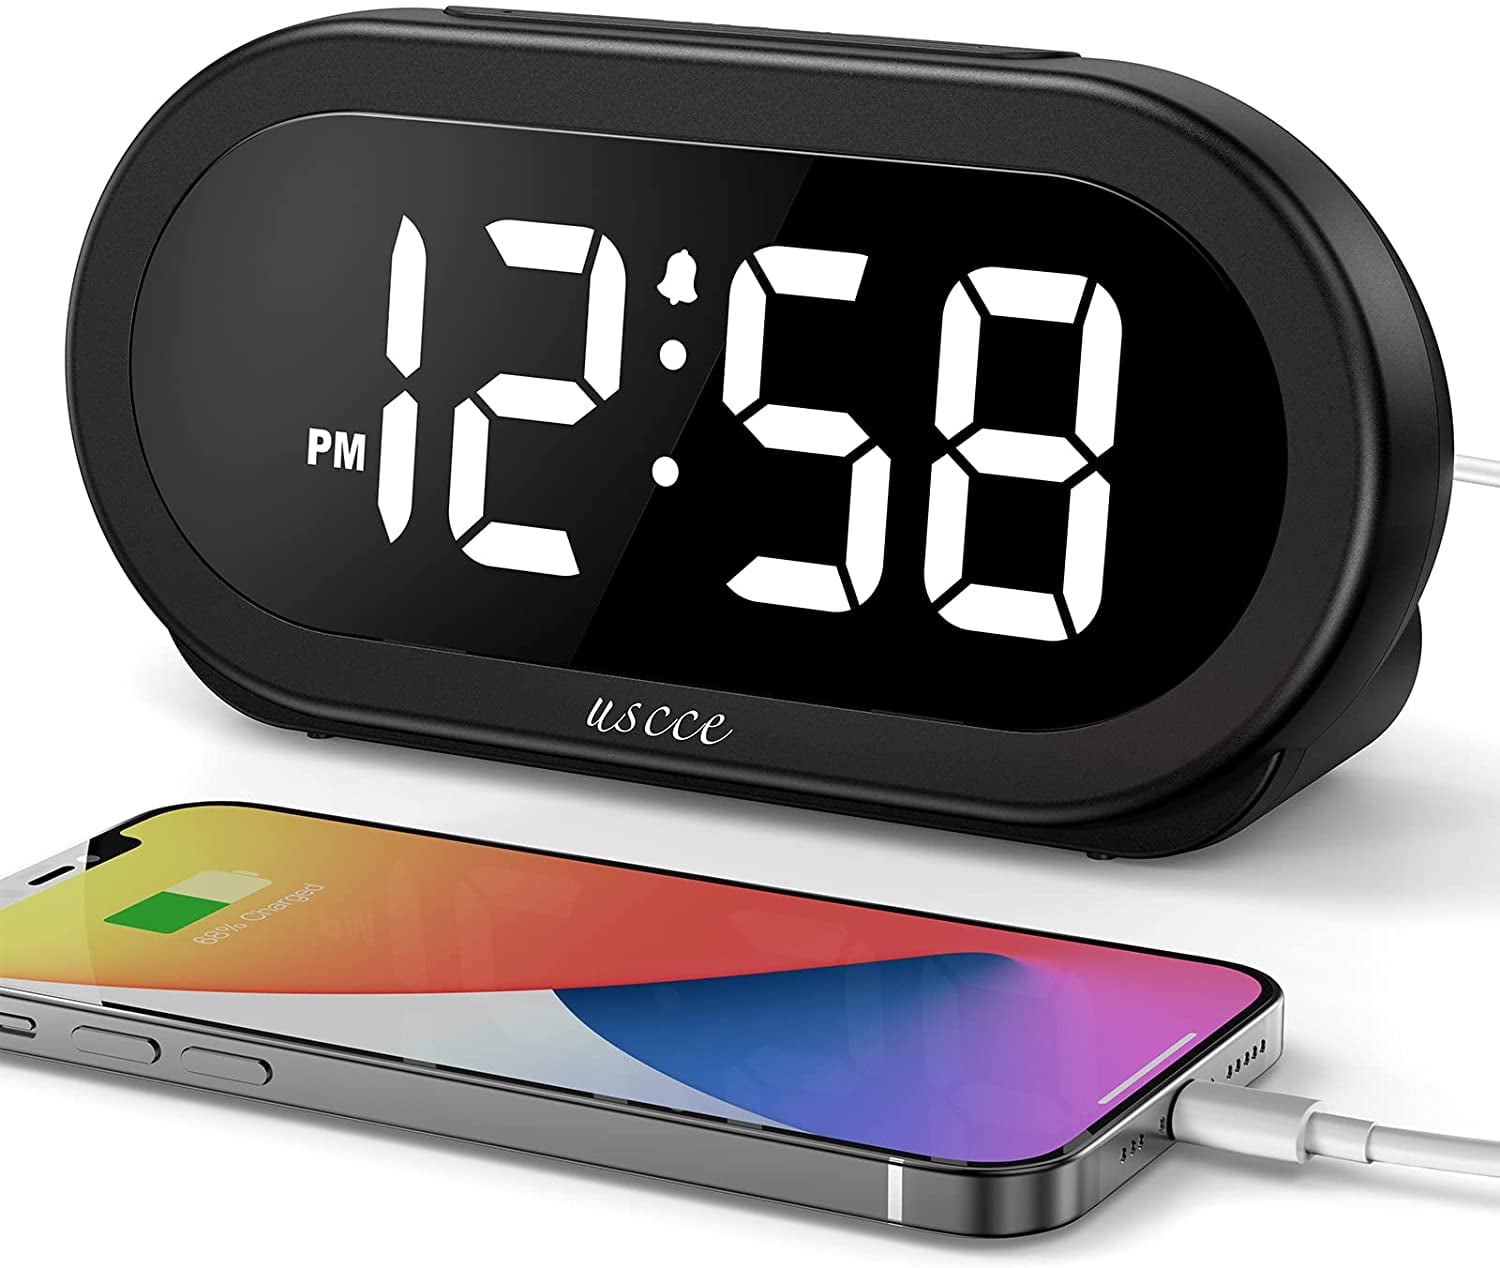 Charging Station/Phon DreamSky Auto Time Set Alarm Clock with Snooze and Dimmer 